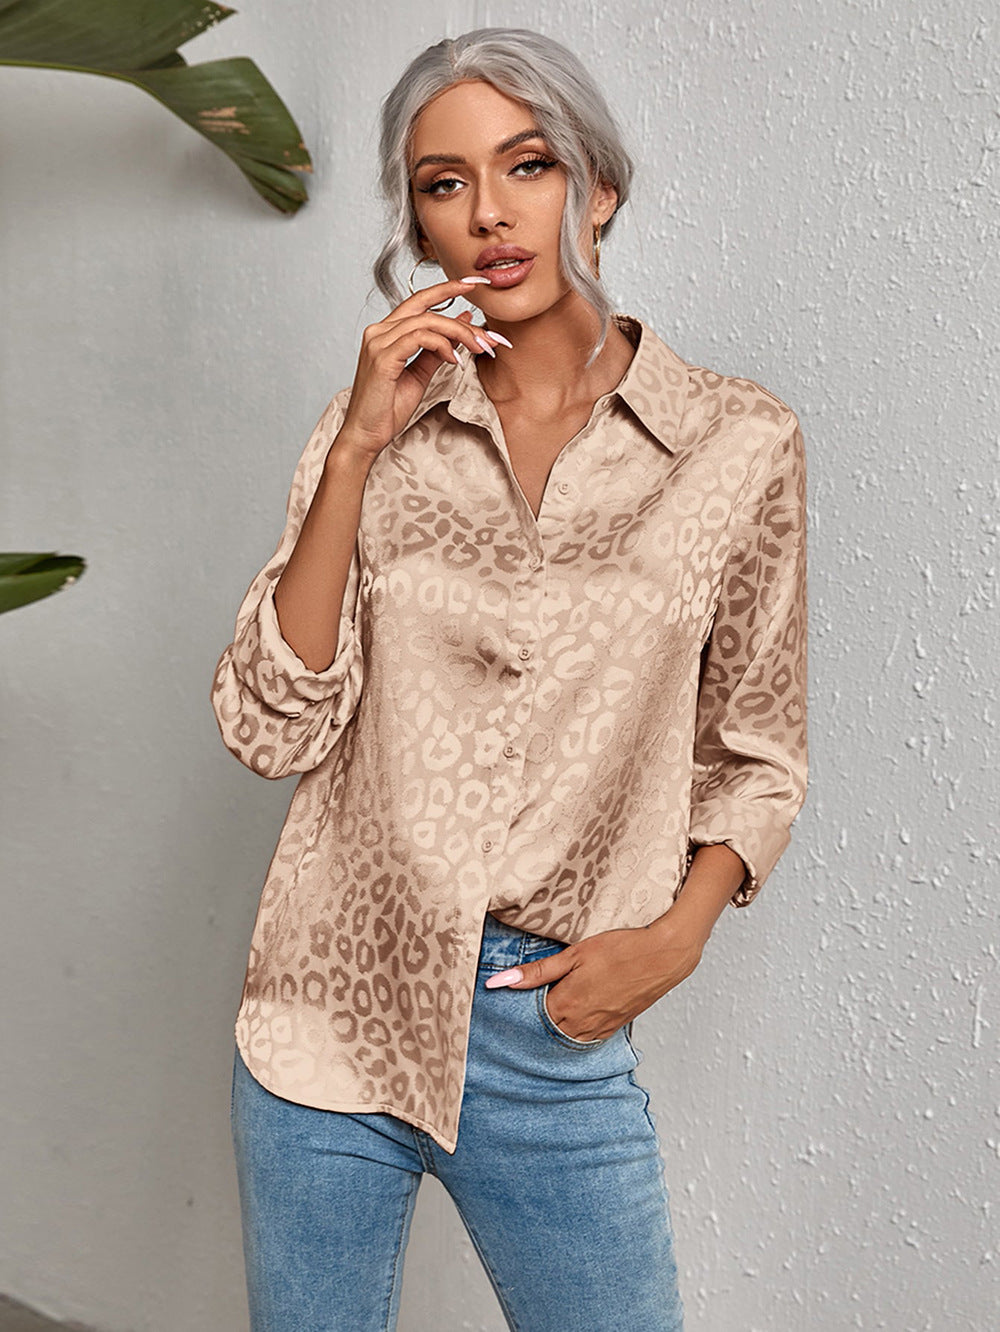 Leopard Printed Blouse